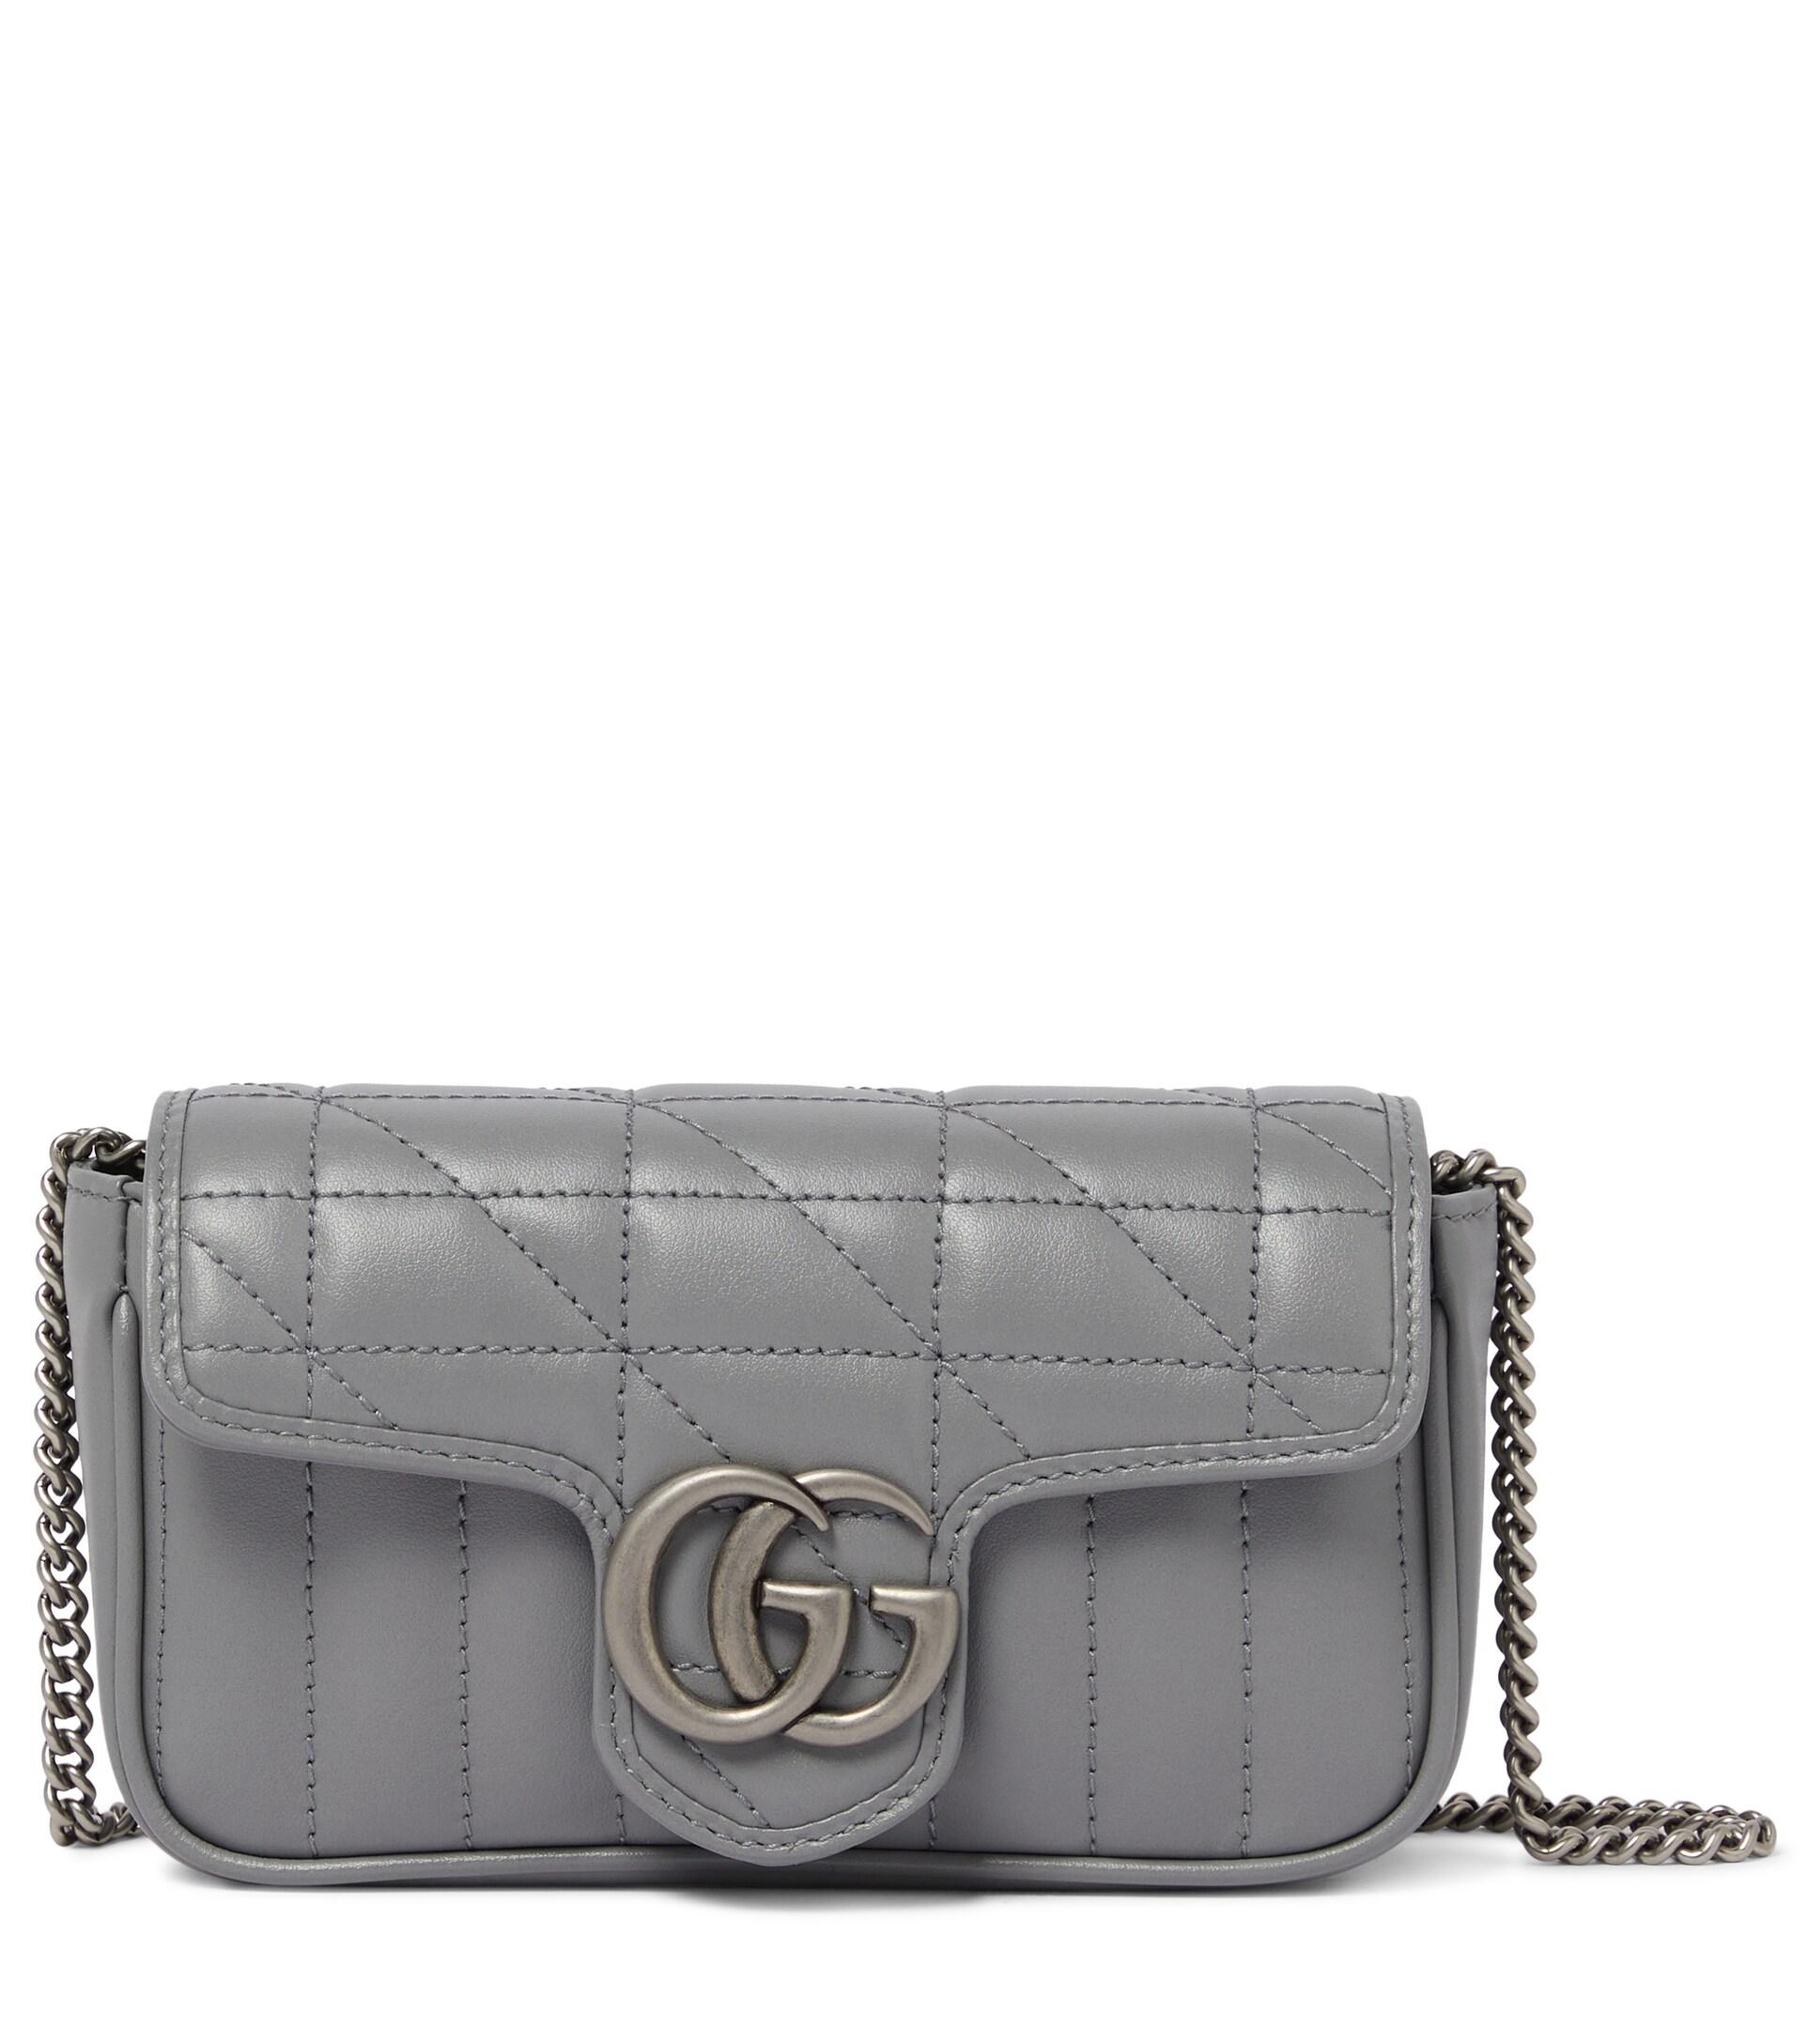 GUCCI, Marmont Gg Super Mini Quilted Shoulder Bag, Women, Crossbody Bags